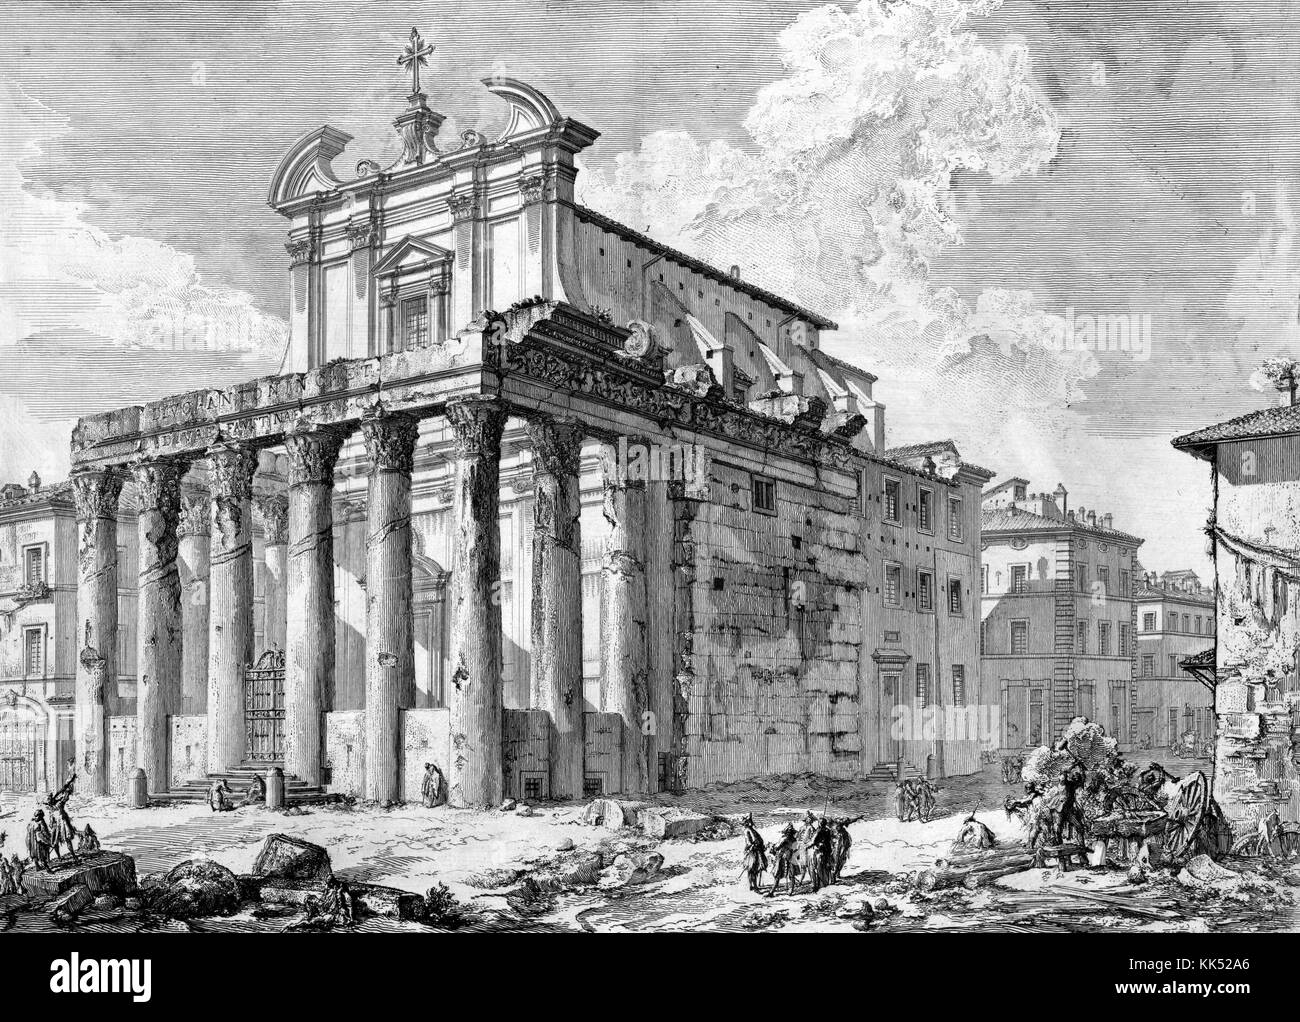 An etching depicting the Temple of Antoninus and Faustina in the area referred to as Campo Vaccino, the structure is part of the Roman Forum, construction began in 141 AD and was converted to a Roman Catholic church at some time between the 7th and 11th centuries, the church restoration of the ancient temple starting in the 16th century worked to preserve the structure, Rome, Italy, 1749. From the New York Public Library. Stock Photo